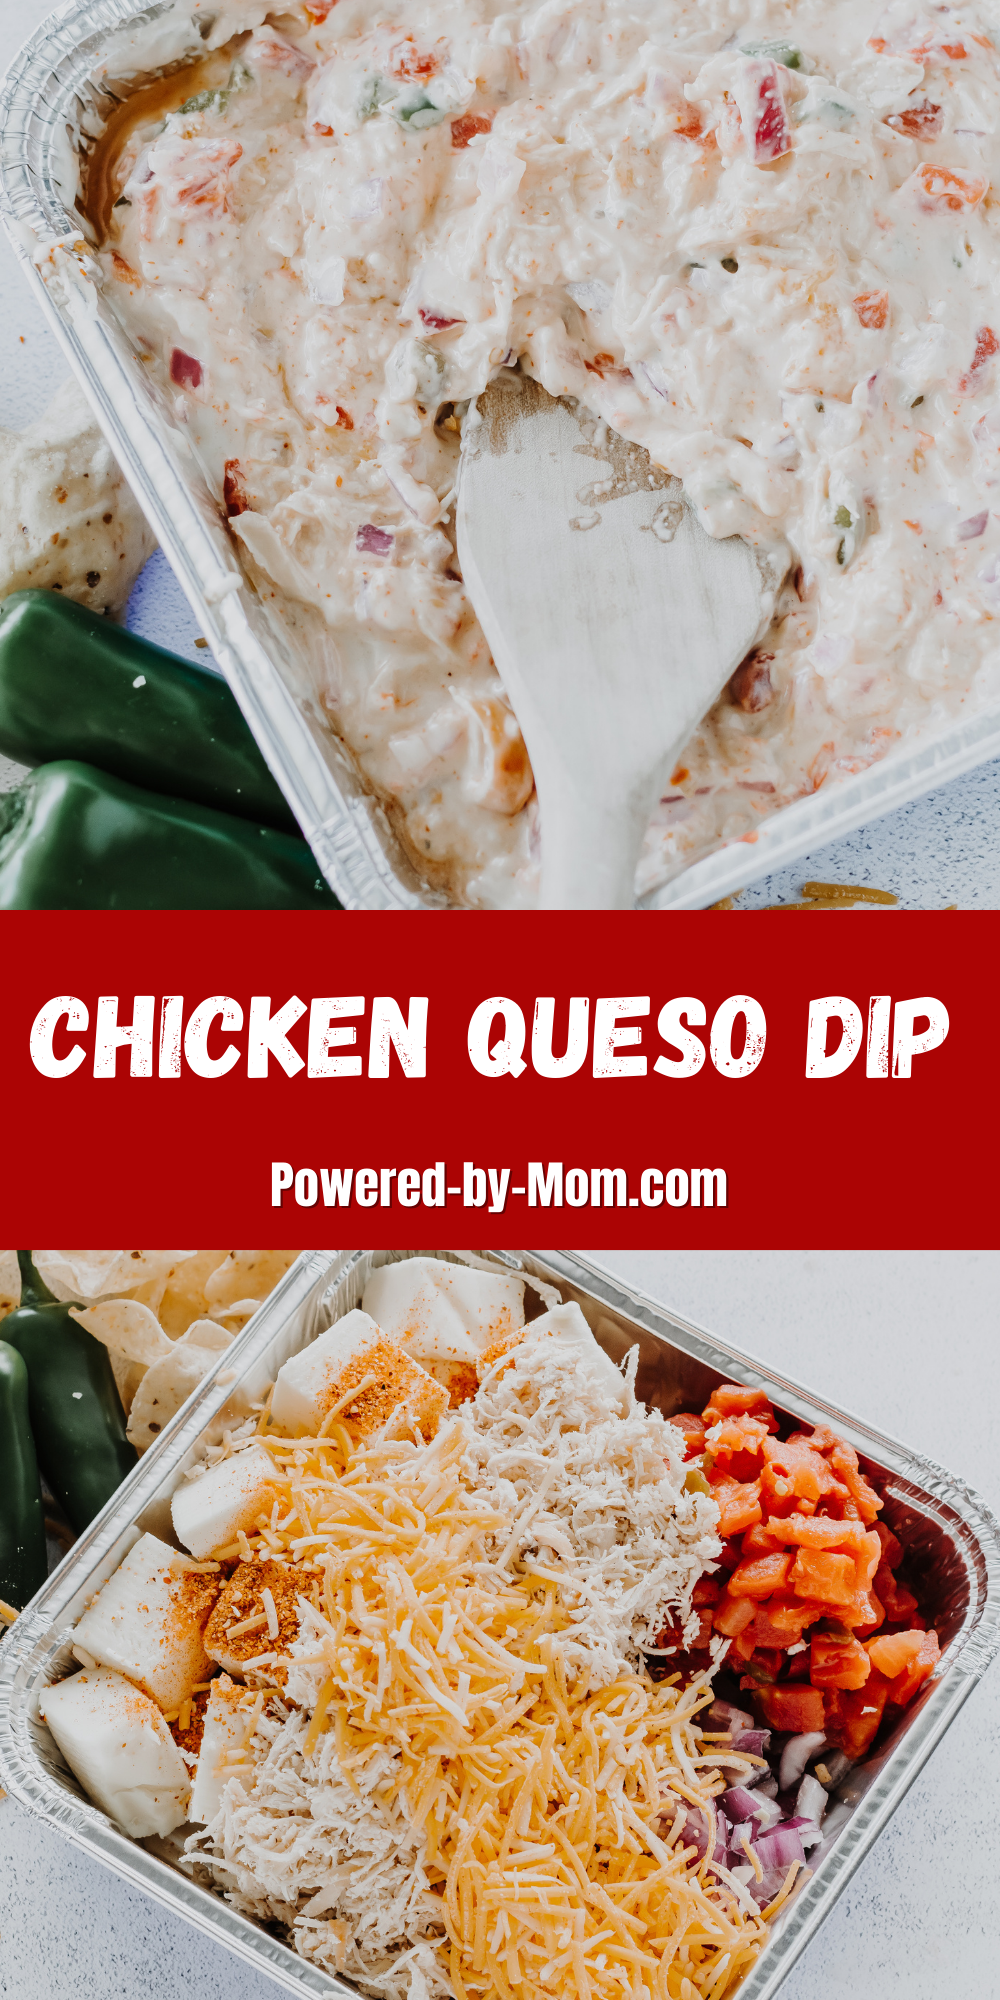 We love this easy Chicken Queso Dip. It's a delicious and hearty dip that is perfect for potlucks, game day or any get togethers. We also share how you can make it a Smoked Chicken Queso Dip. Serve with your favourite dippers whether that's tortilla chips, crackers or a baguette.  